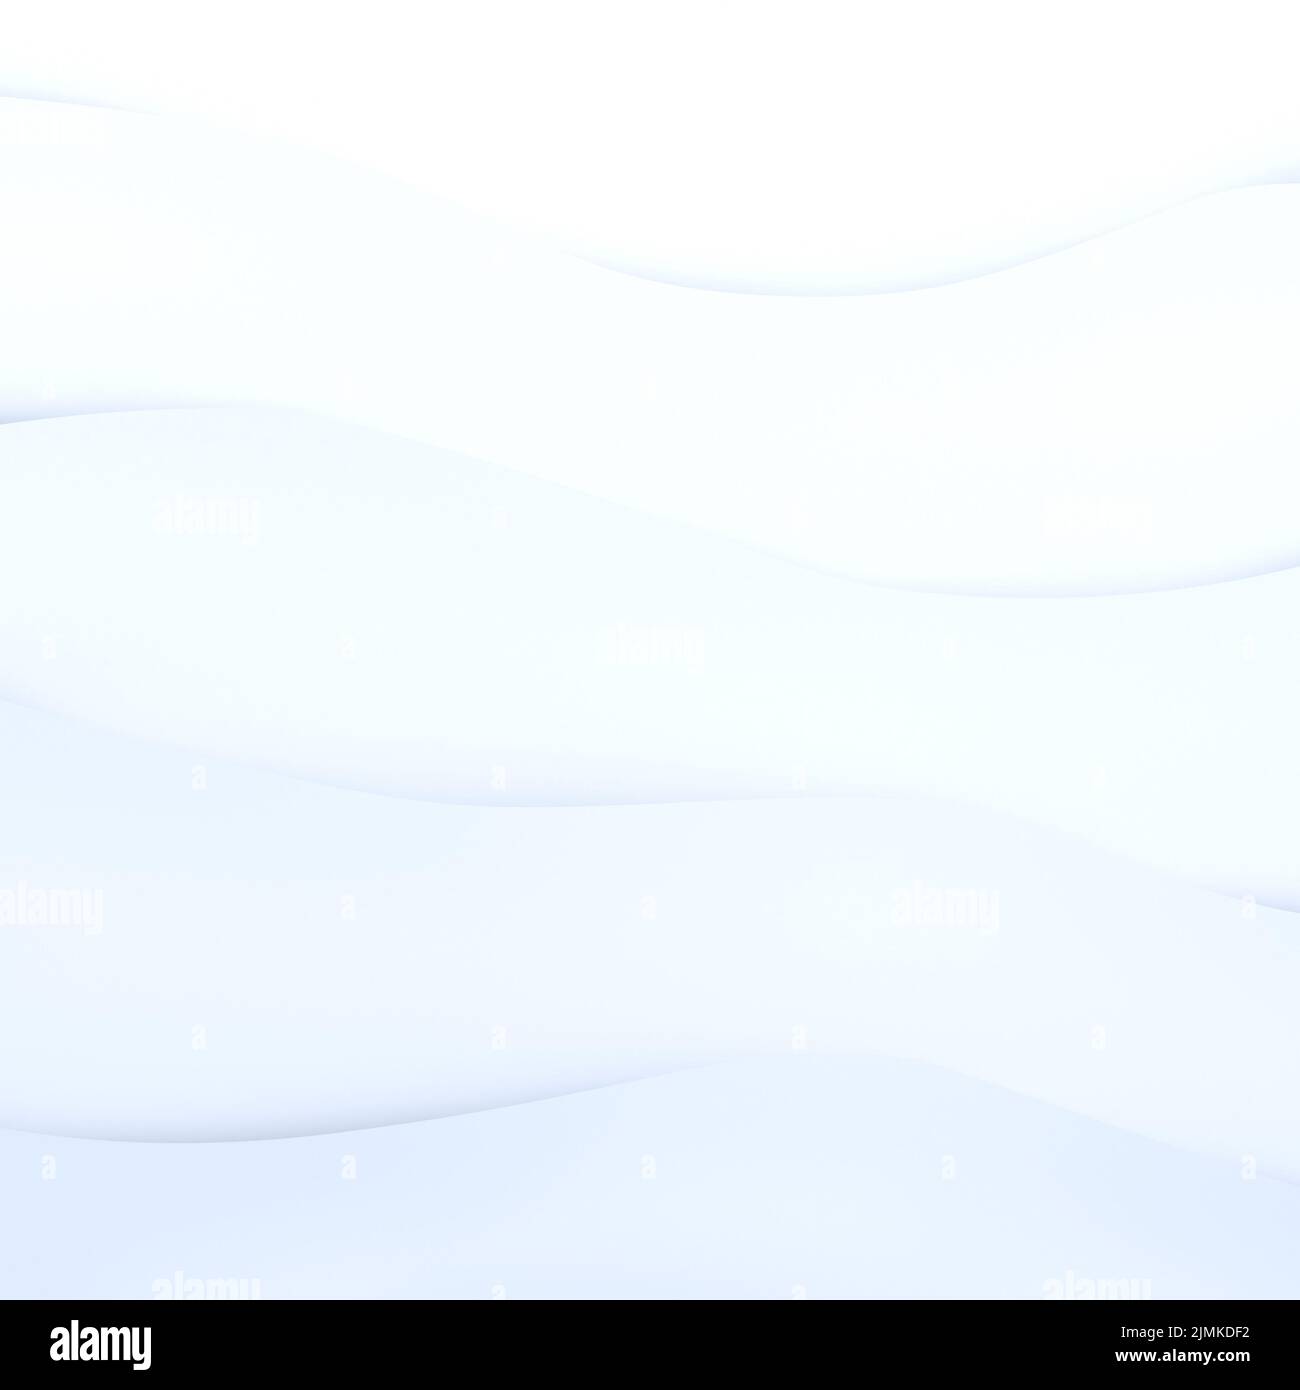 White and light blue overlapping layers or bent, wavy lines with shadows. Modern, minimalistic and abstract background with copy space. Stock Photo